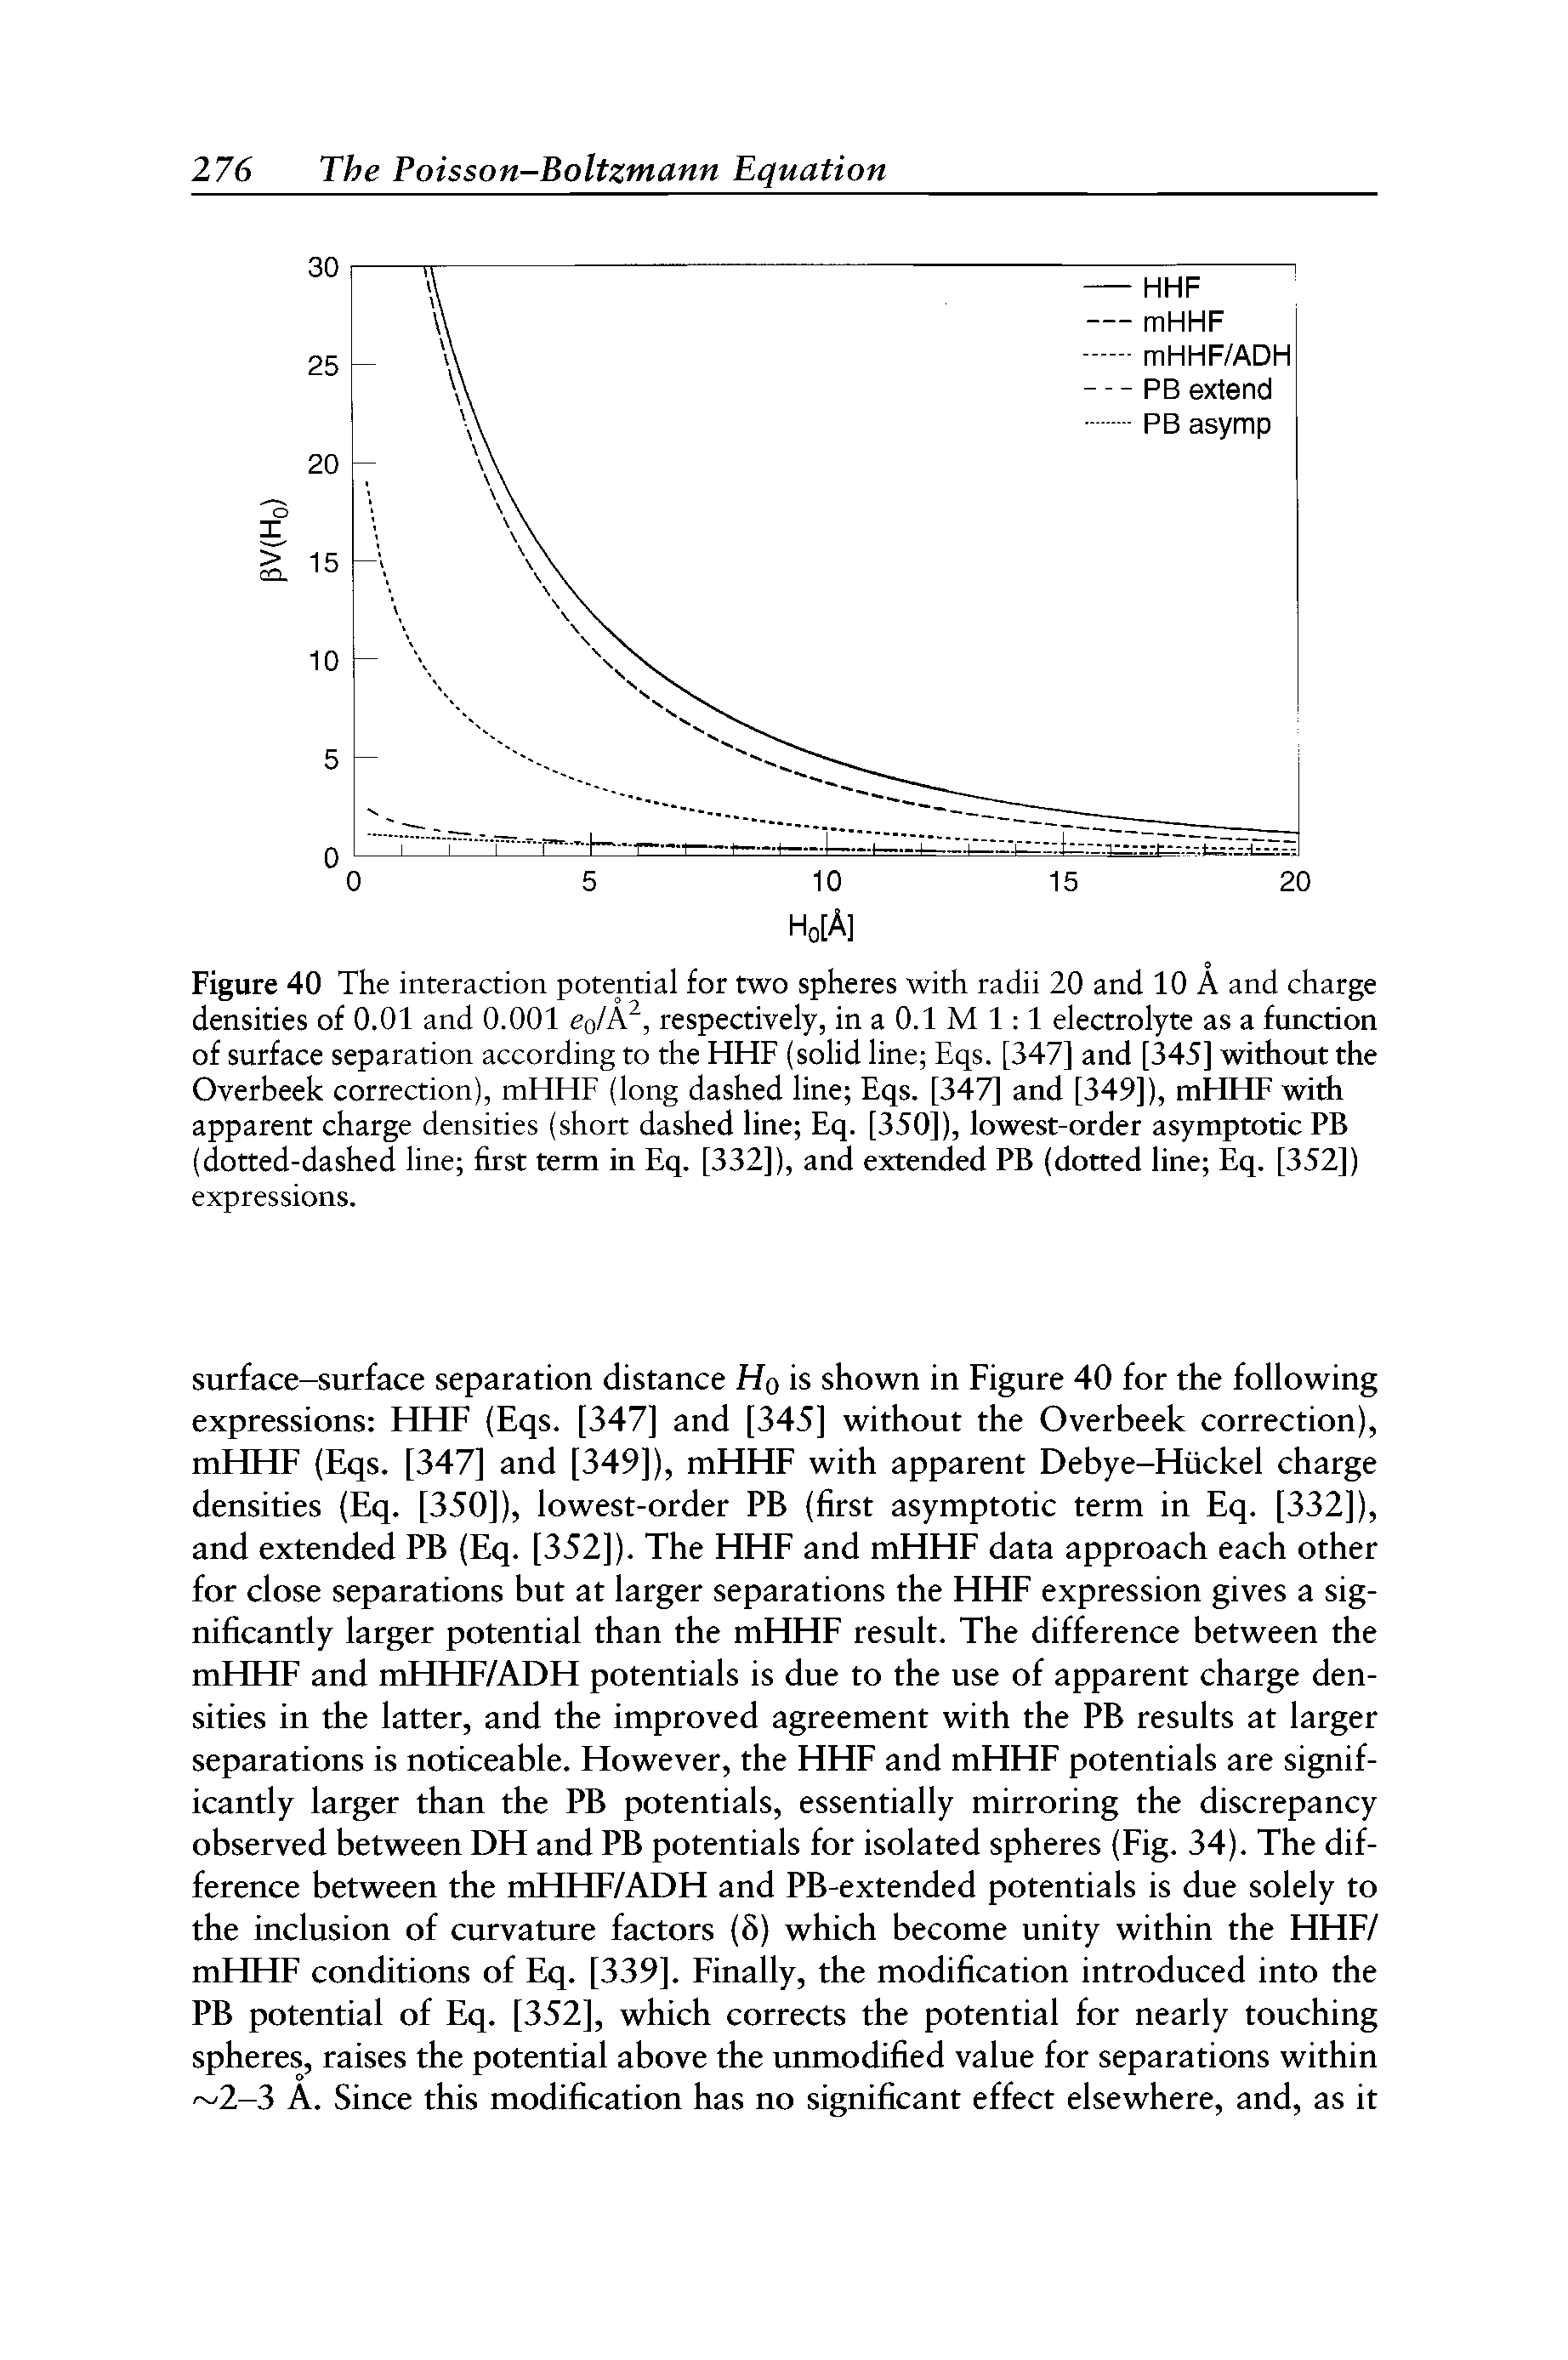 Figure 40 The interaction potential for two spheres with radii 20 and 10 A and charge densities of 0.01 and 0.001 cqIA, respectively, in a 0.1 M 1 1 electrolyte as a function of surface separation according to the HHF (solid line Eqs. [347] and [345] without the Overbeek correction), mHHF (long dashed line Eqs. [347] and [349]), mHHF with apparent charge densities (short dashed line Eq. [350]), lowest-order asymptotic PB (dotted-dashed line first term in Eq. [332]), and extended PB (dotted line Eq. [352]) expressions.